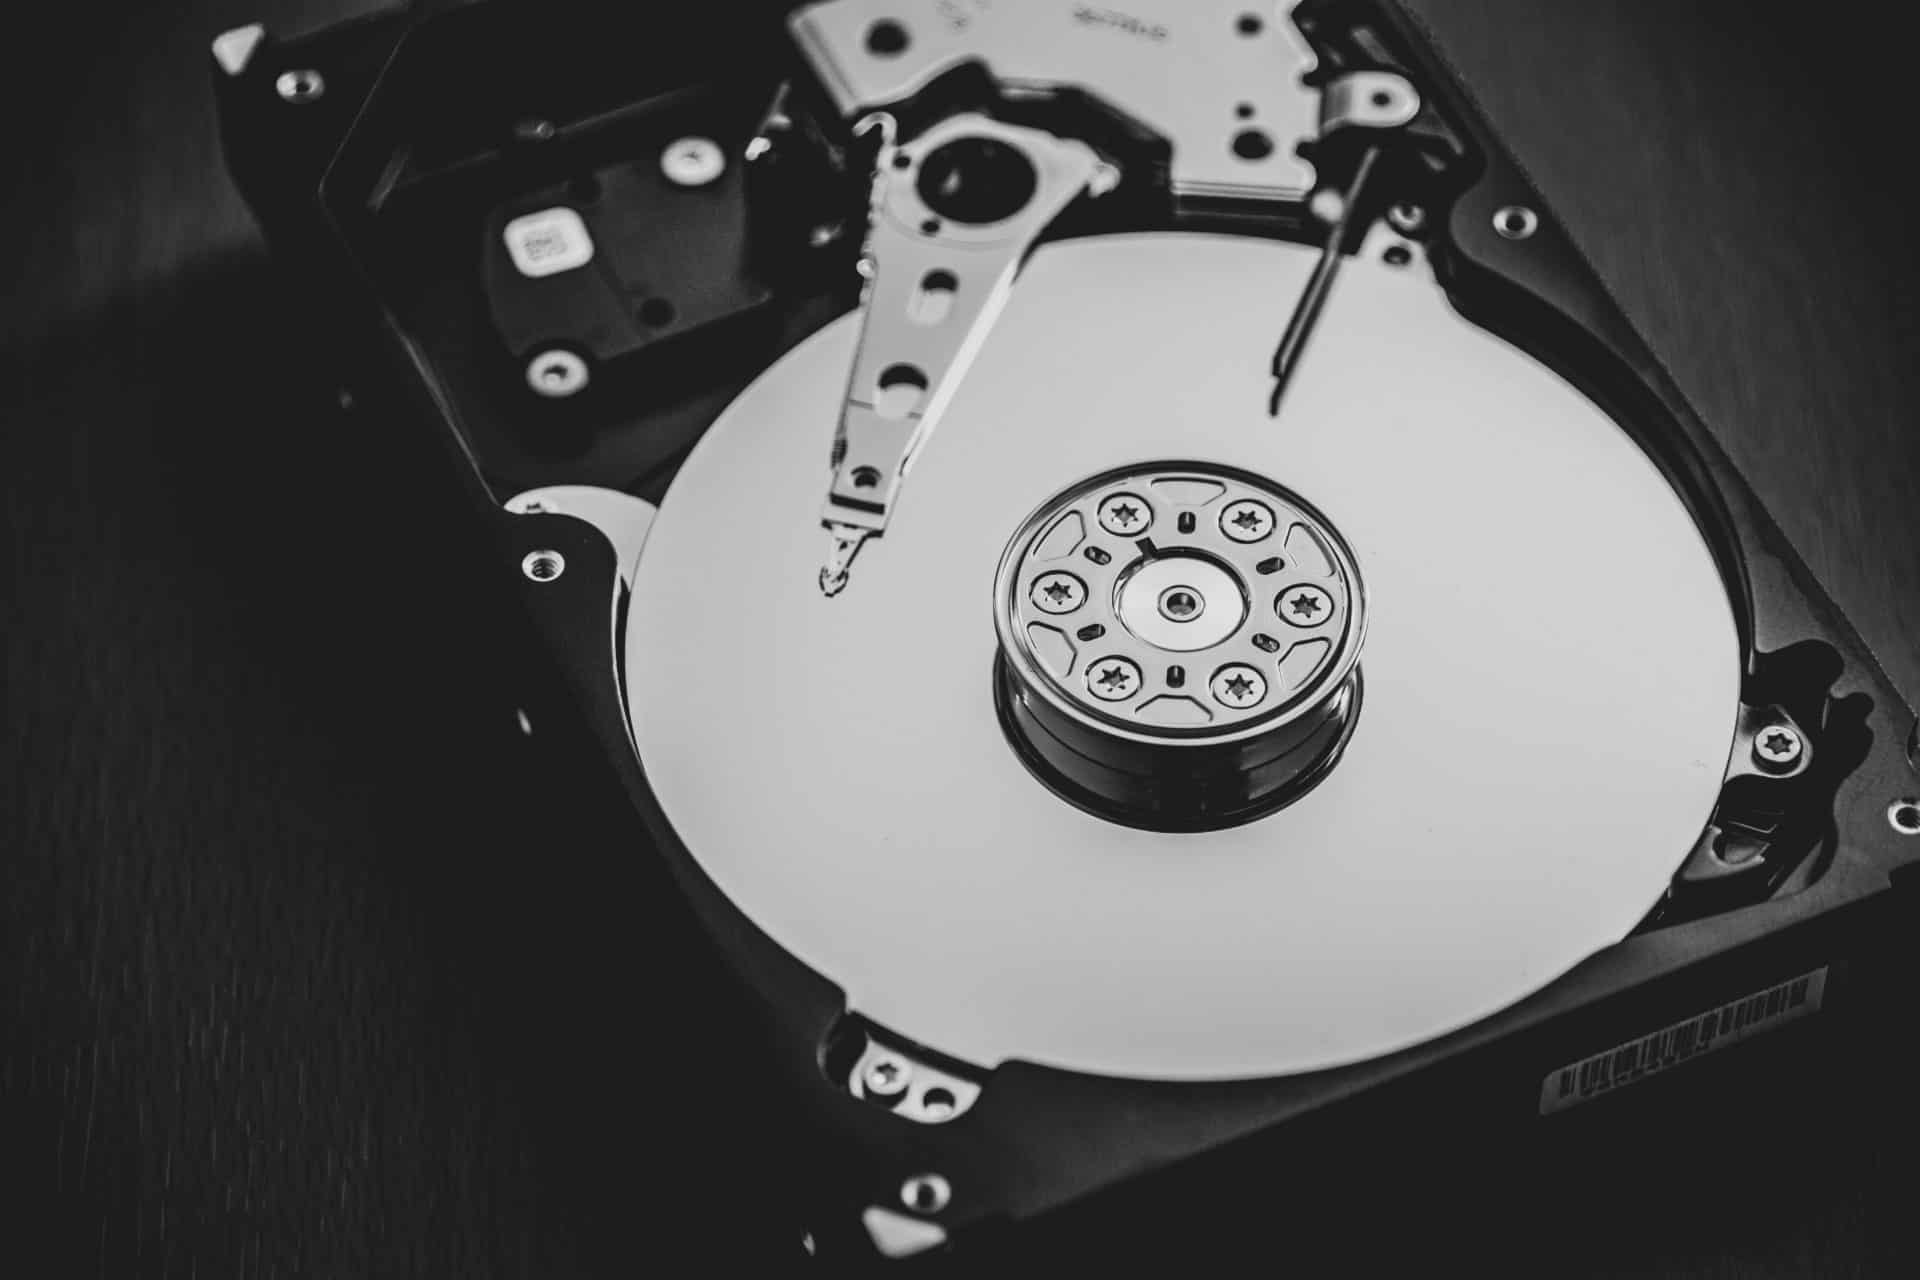 Data Backup and Recovery